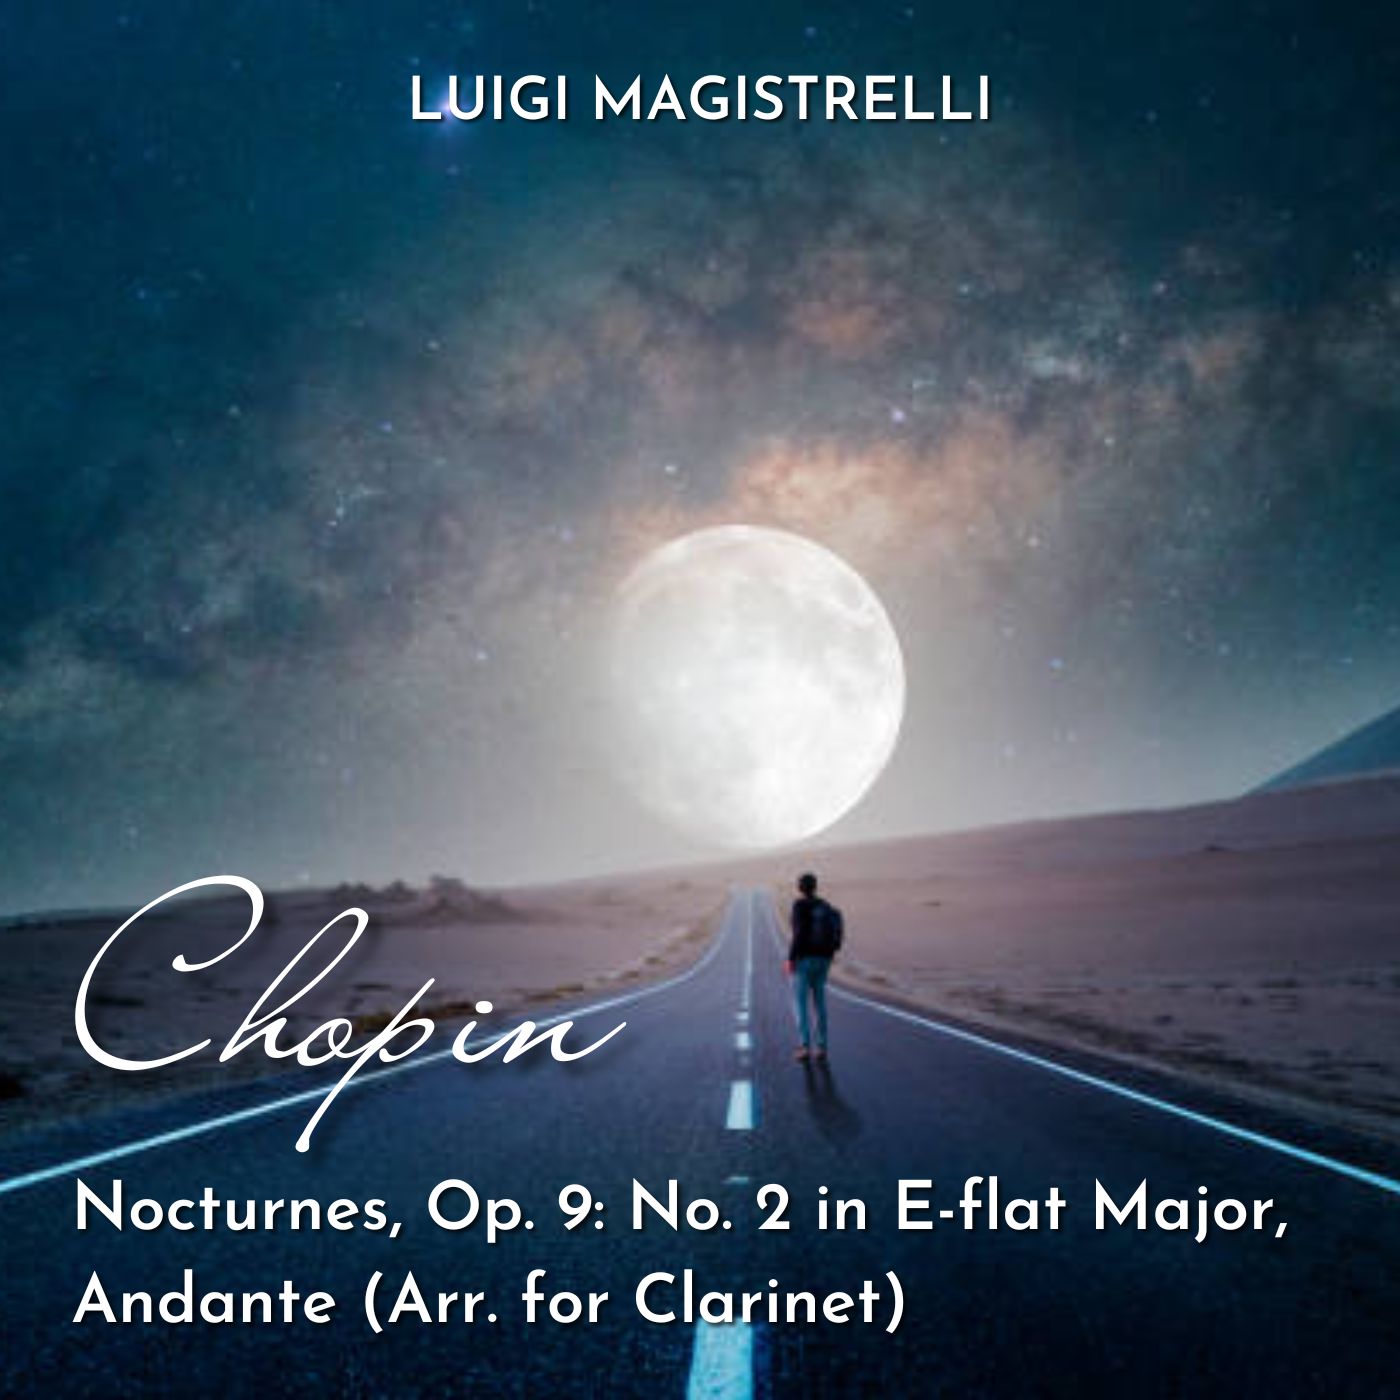 Nocturnes, Op. 9: No. 2 in E-flat Major, Andante (Arr. for Clarinet by A. Gabucci)